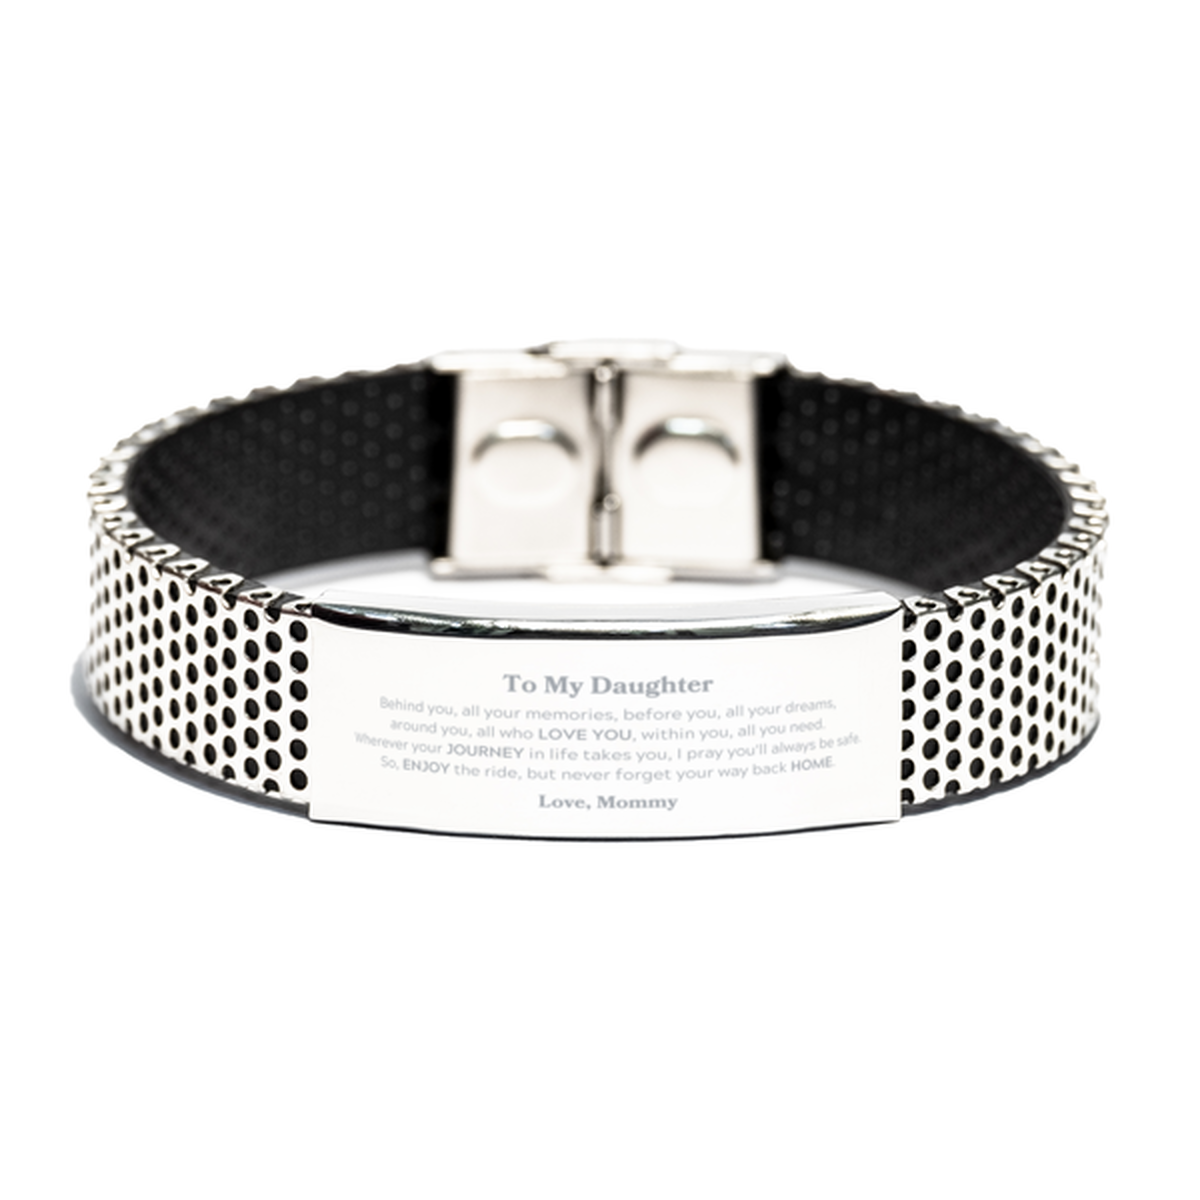 To My Daughter Graduation Gifts from Mommy, Daughter Stainless Steel Bracelet Christmas Birthday Gifts for Daughter Behind you, all your memories, before you, all your dreams. Love, Mommy